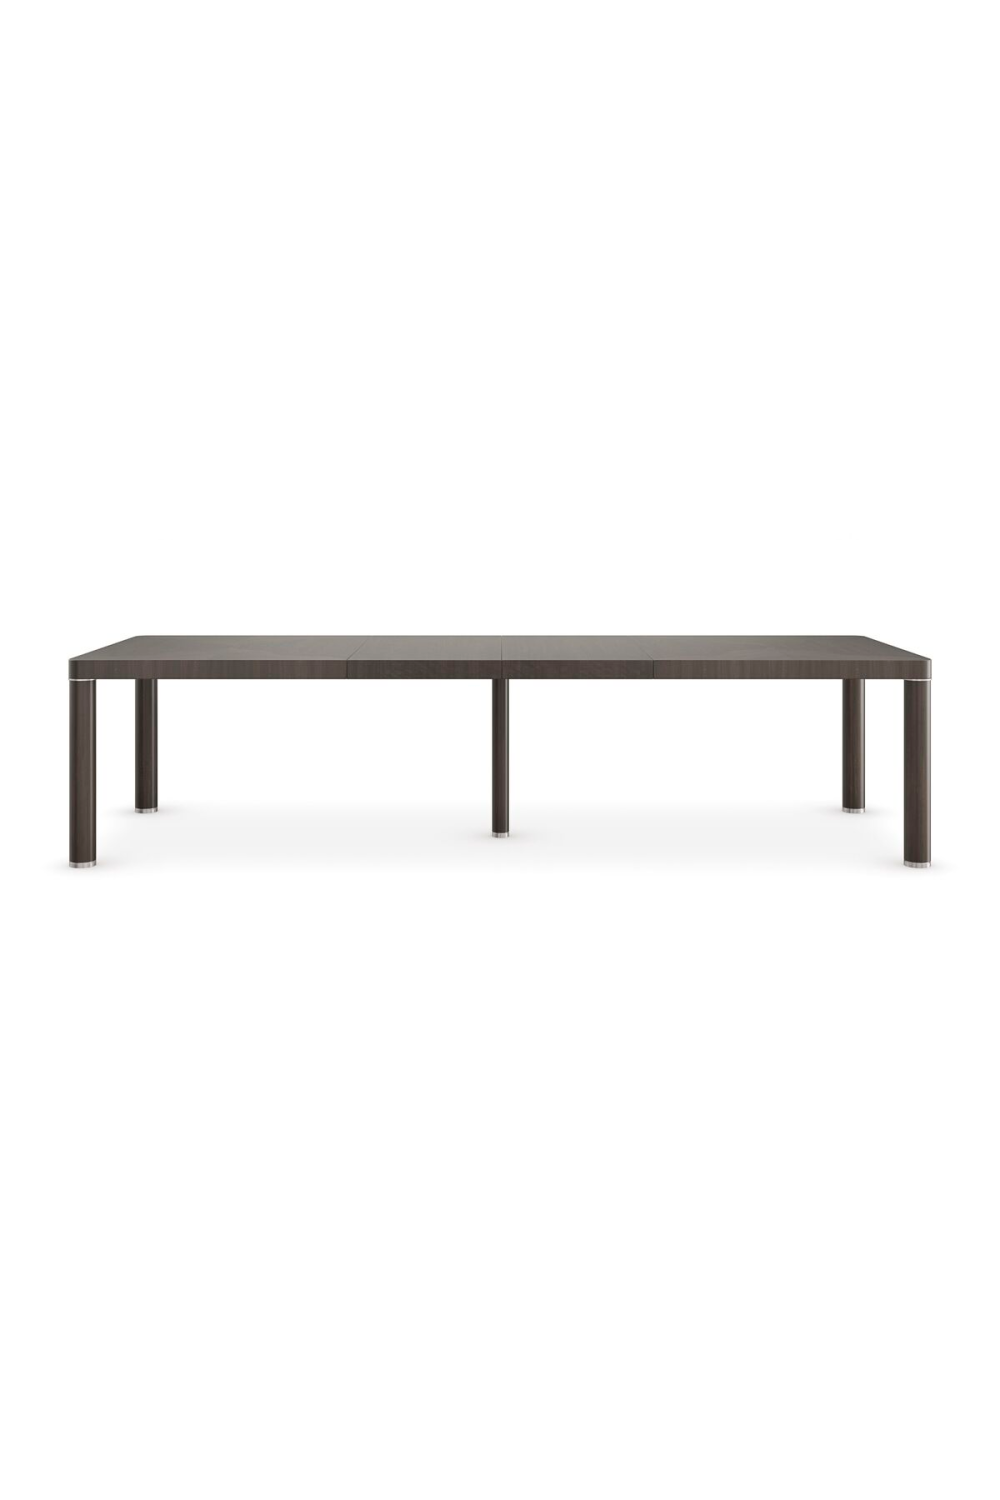 Parsons-Style Dining Table | Caracole Mirror Image | Oroa.com